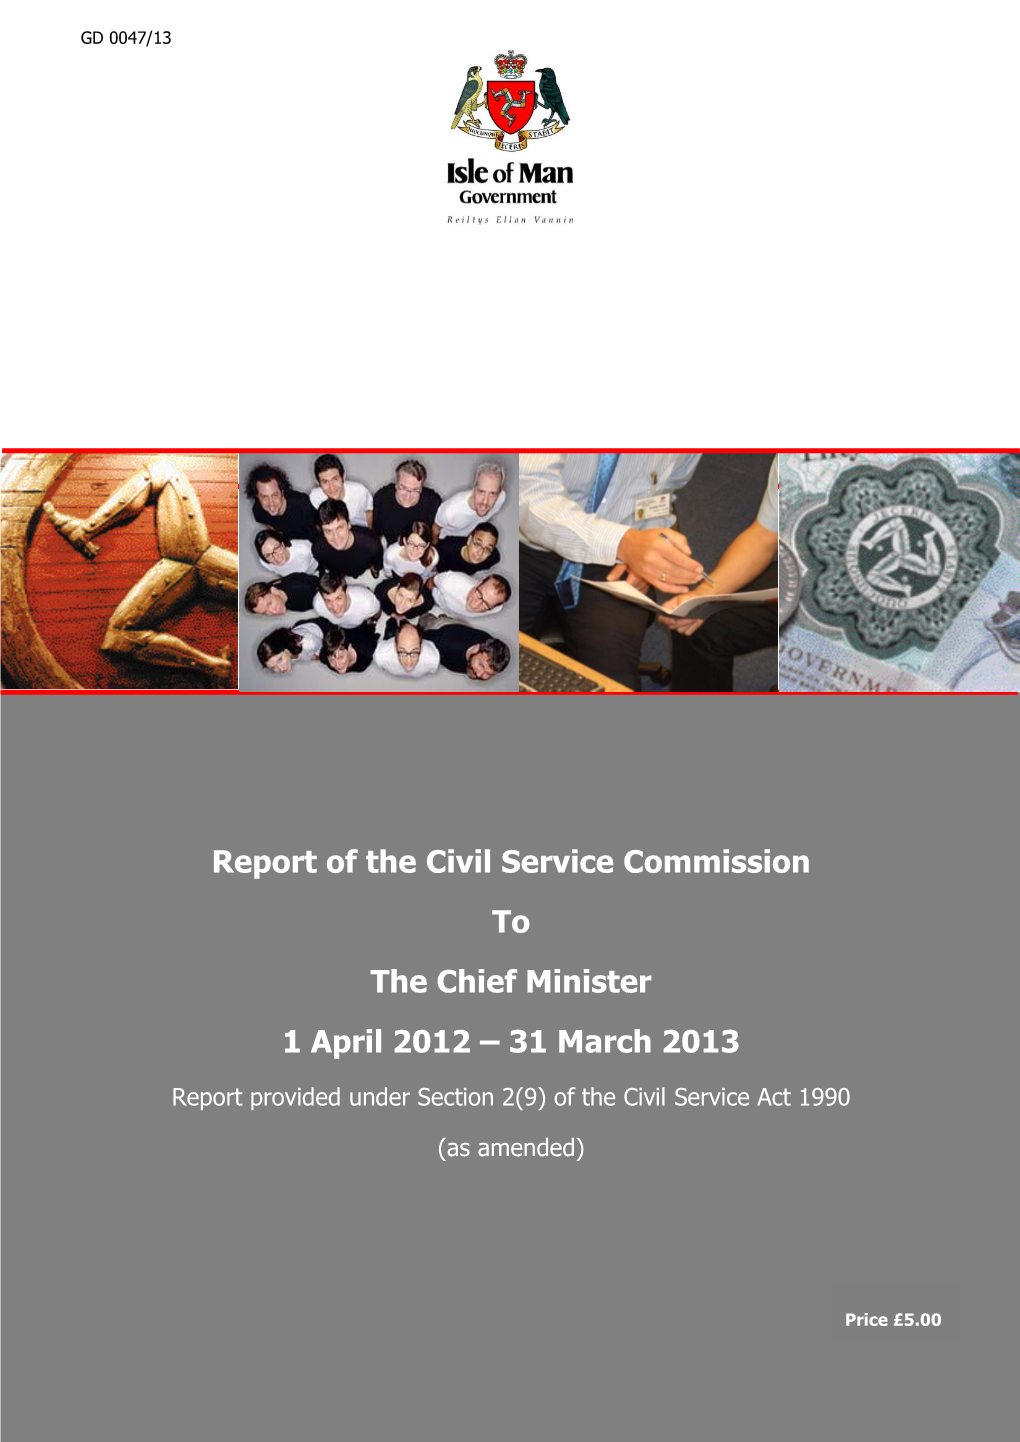 Report of the Civil Service Commission to the Chief Minister 1 April 2012 – 31 March 2013